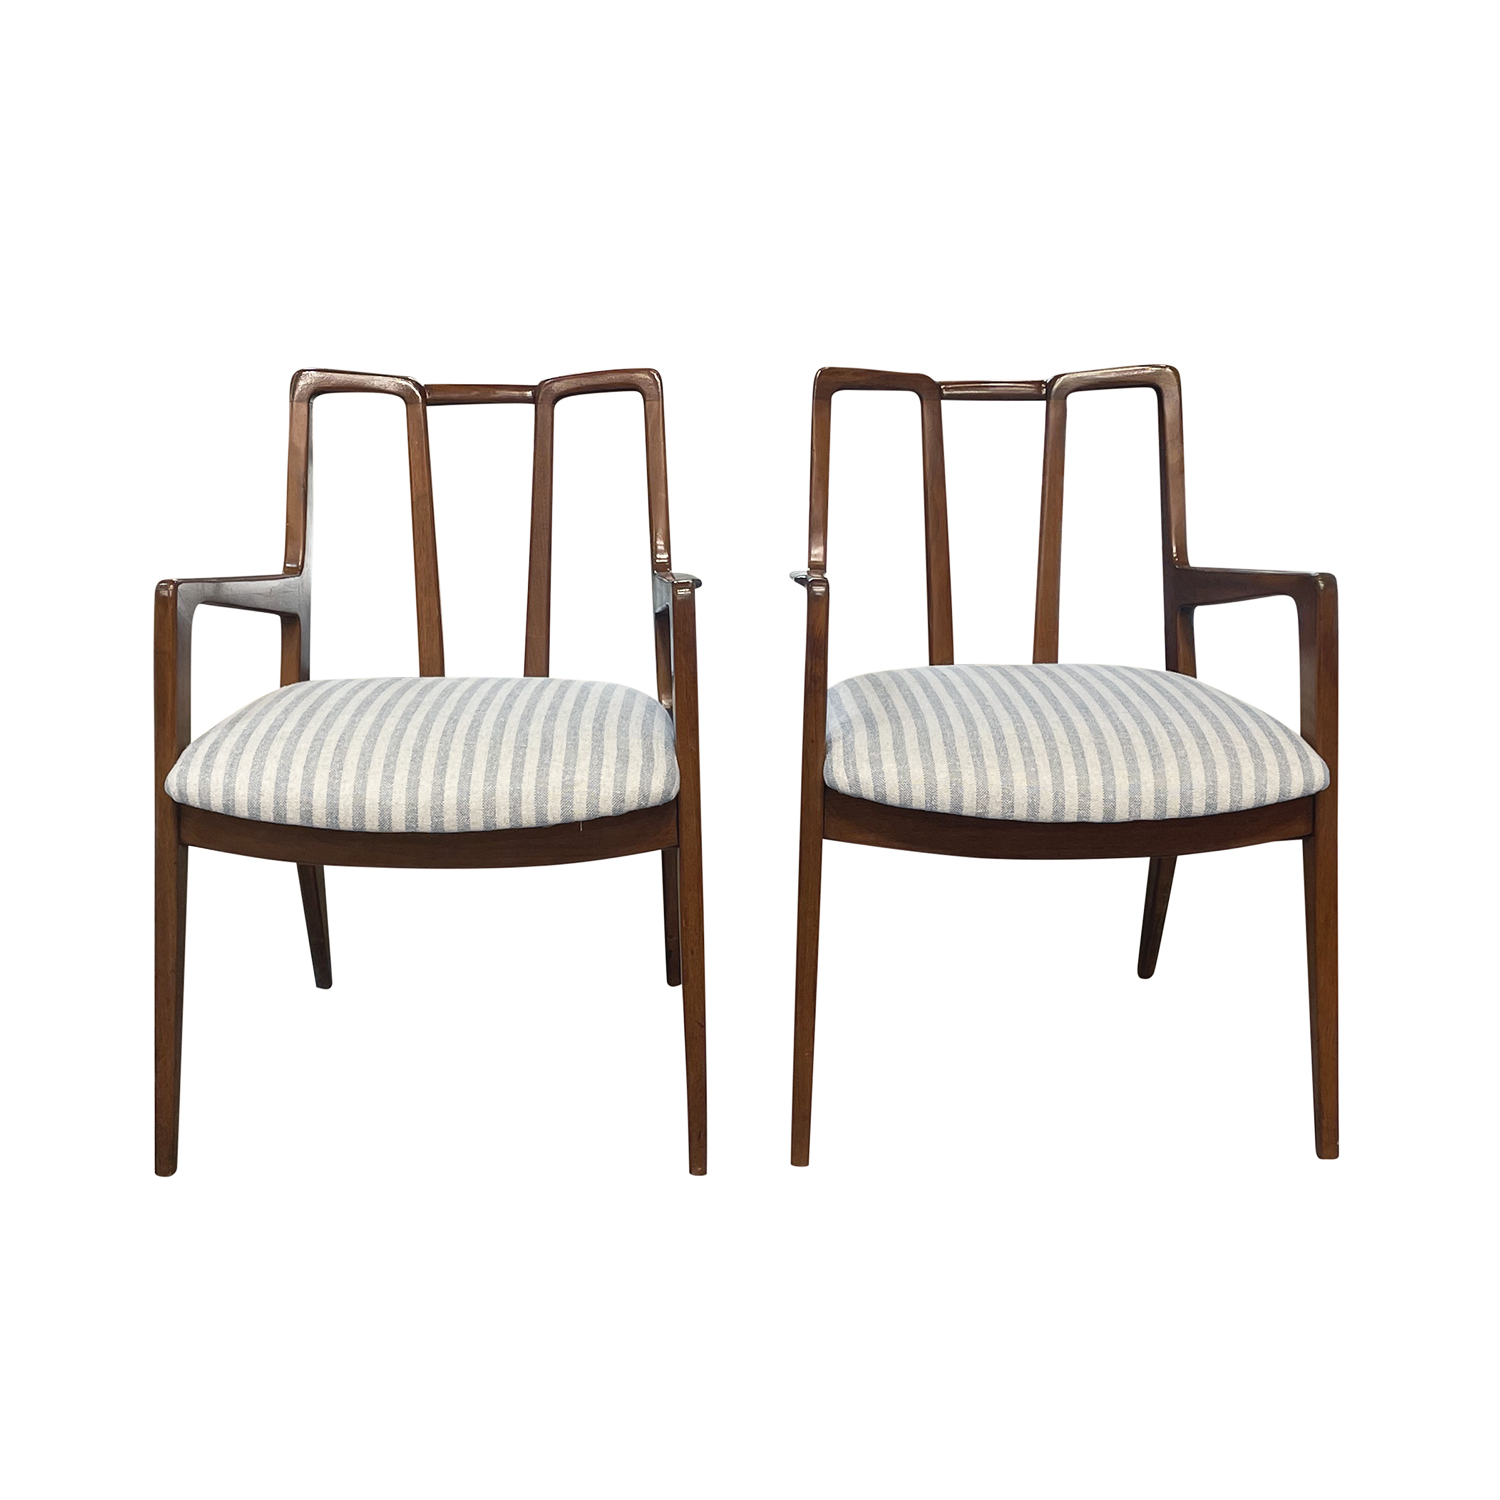 20th Century American Pair of Walnut Armchairs – Dining Chairs by John Stuart